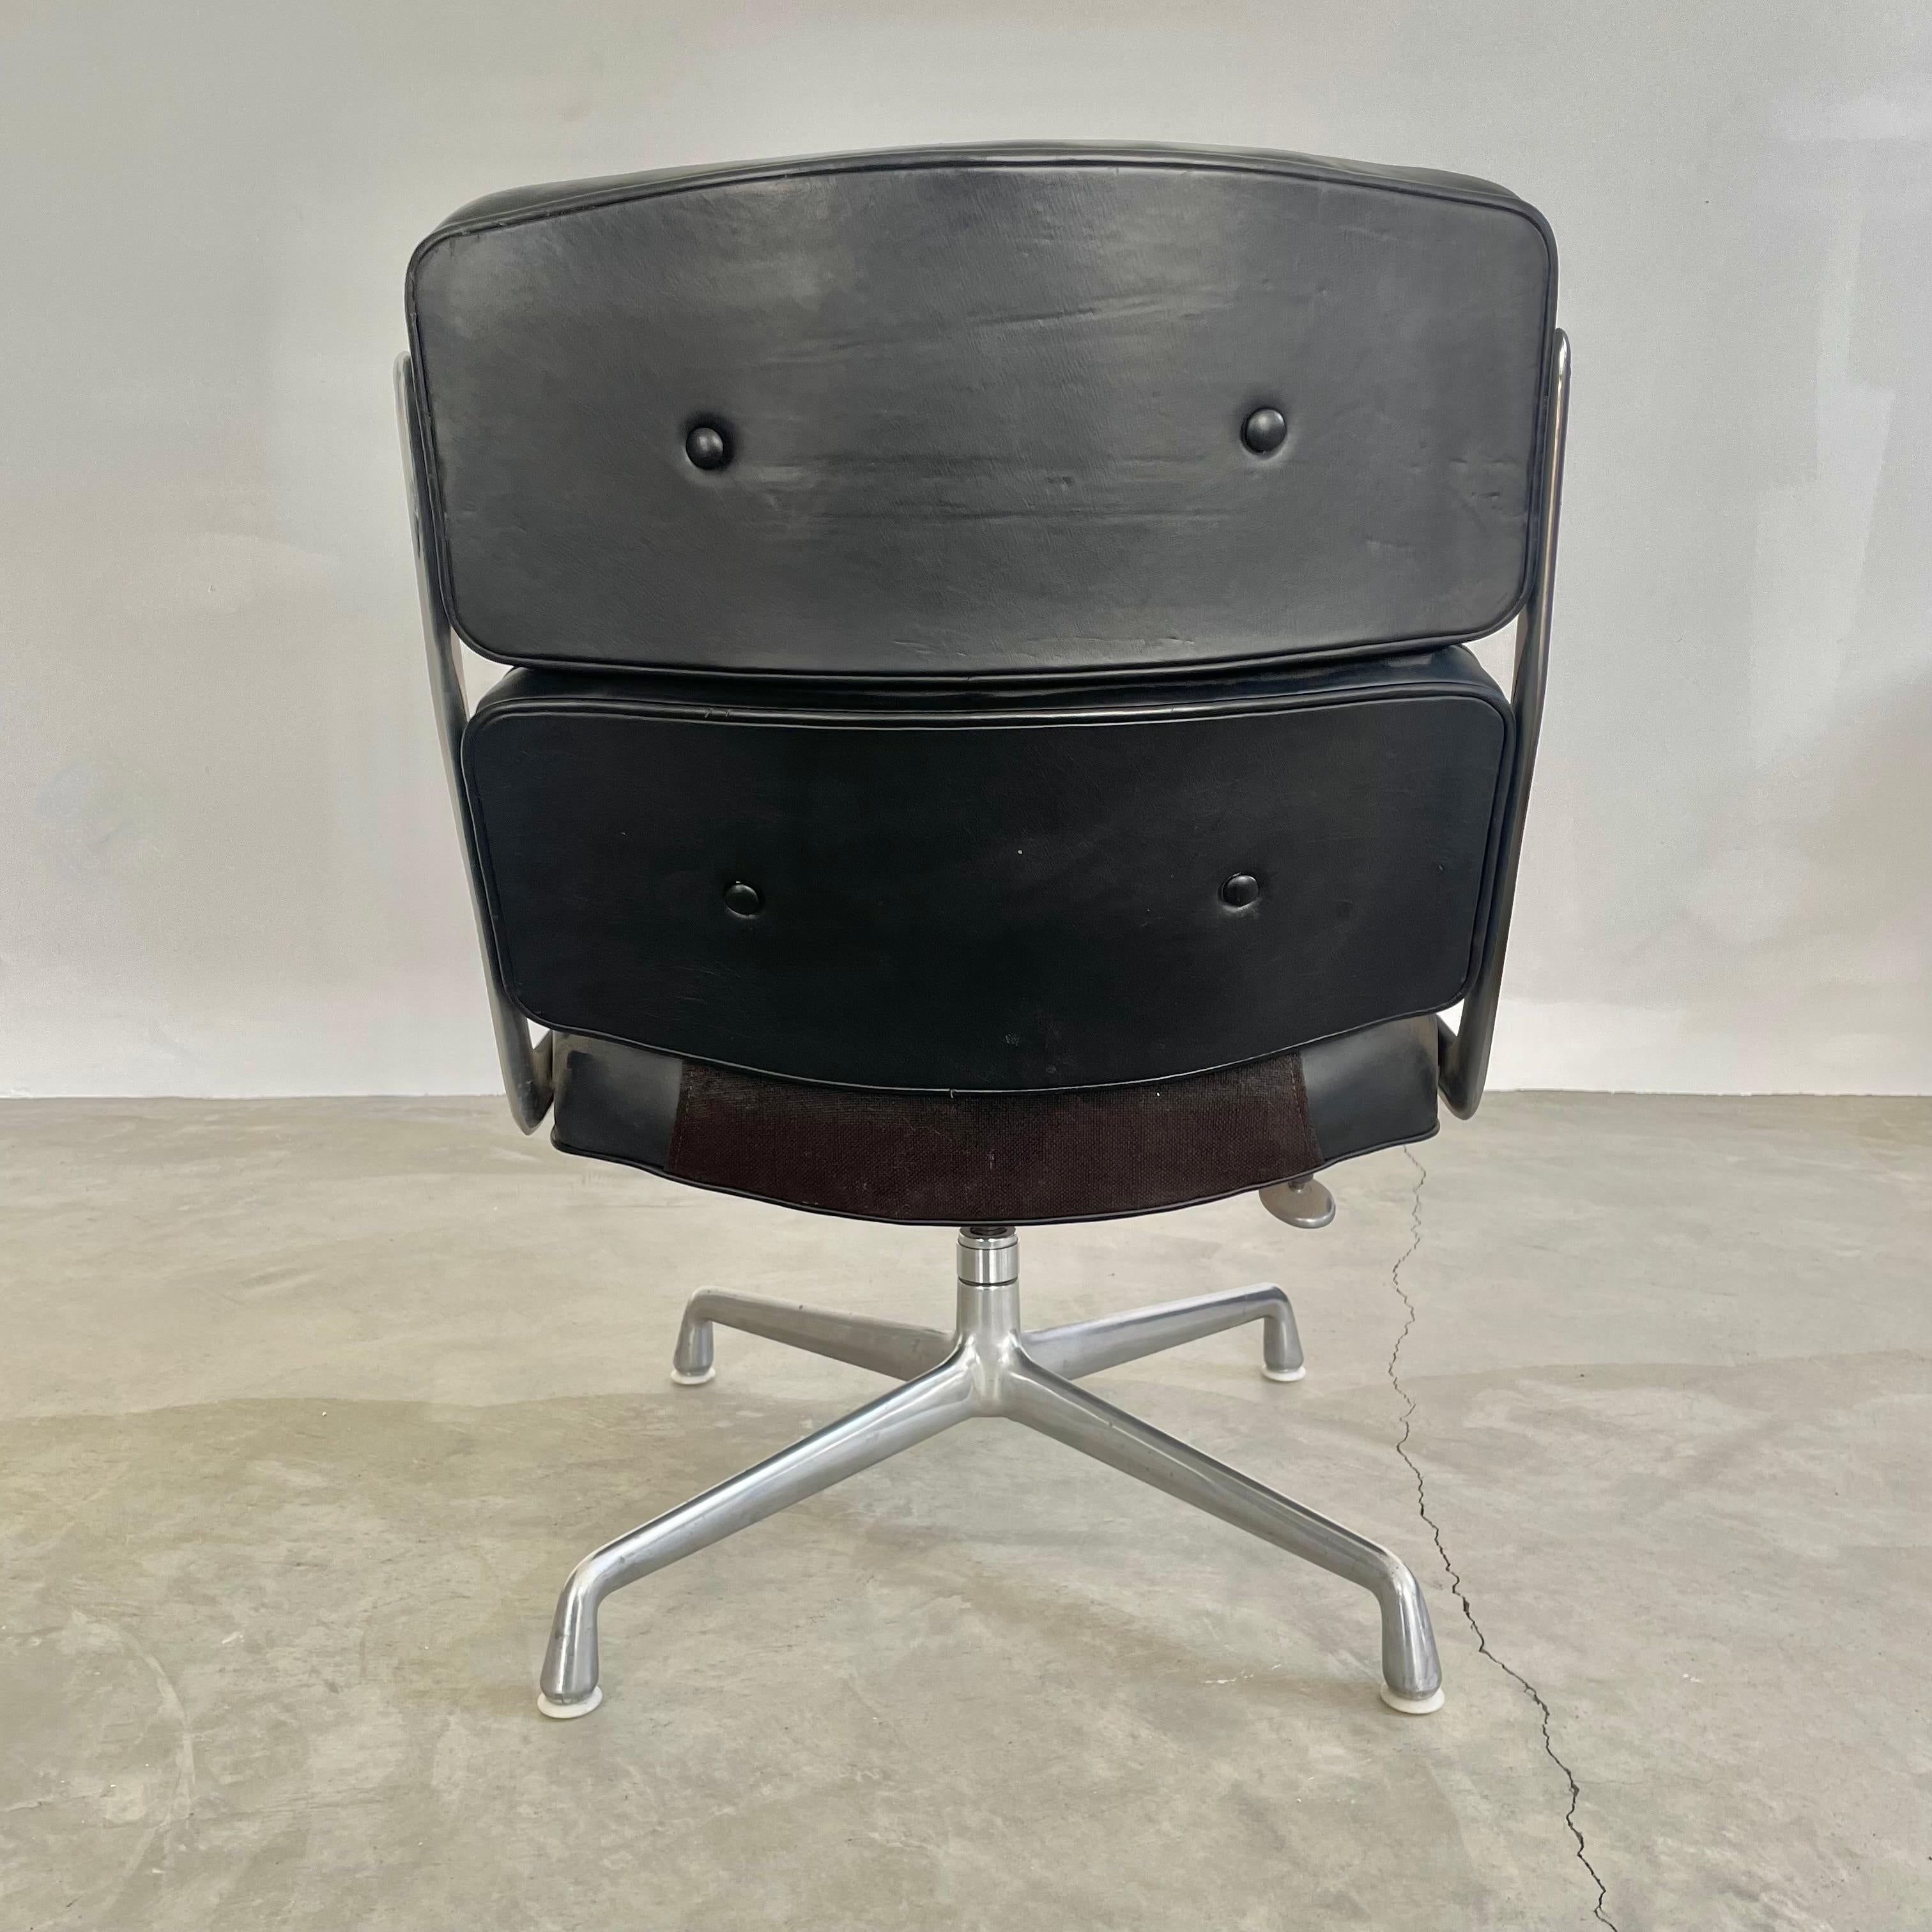 Late 20th Century Eames Time Life Chair in Black Leather for Herman Miller, 1990s USA